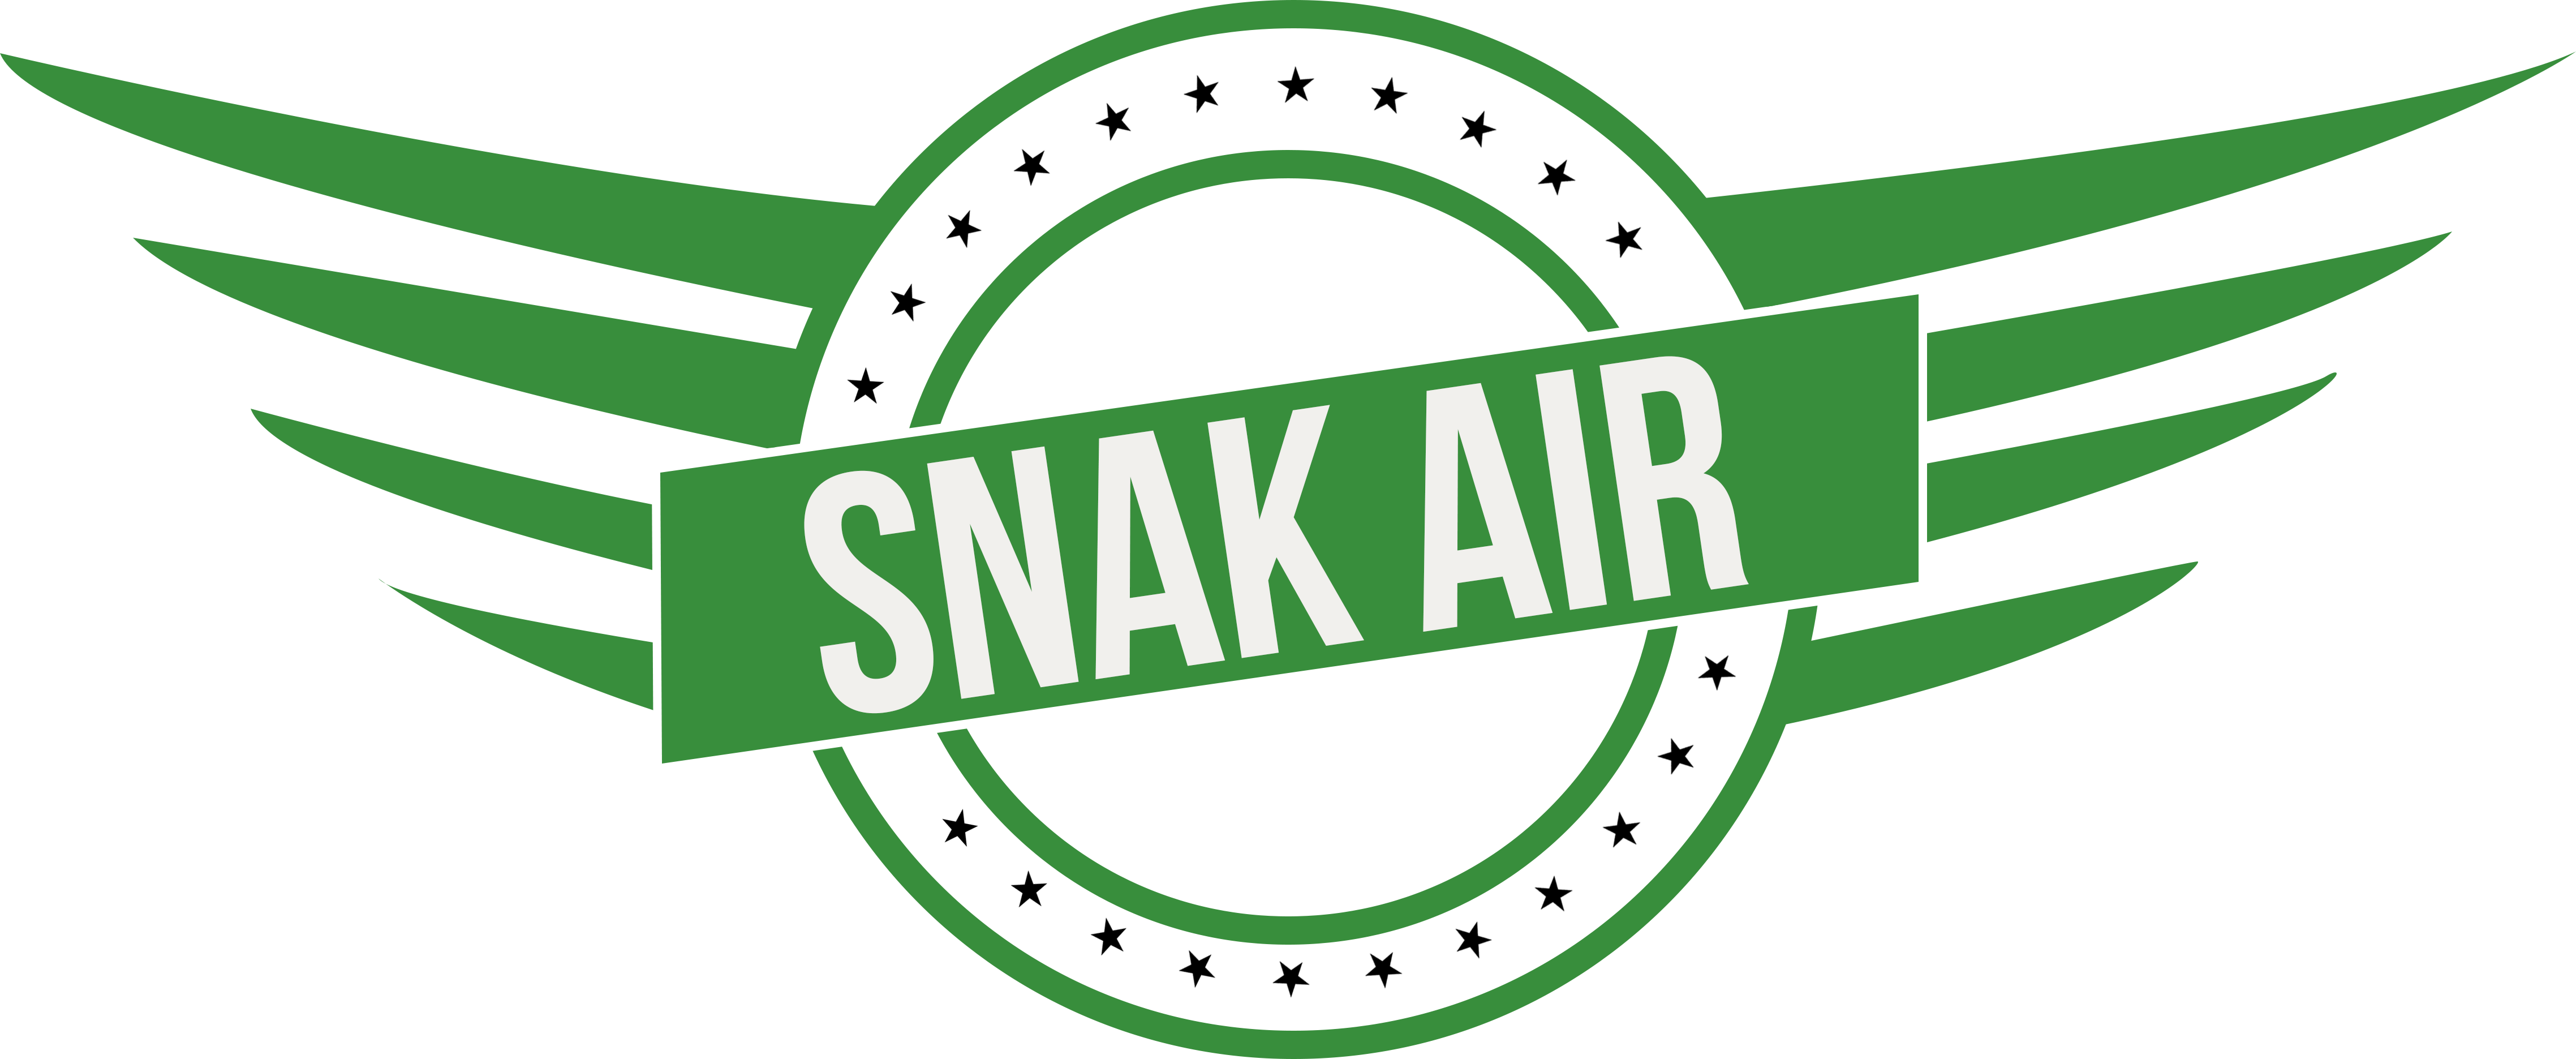 What Is Snak Air - Tour And Travel (4553x1871)